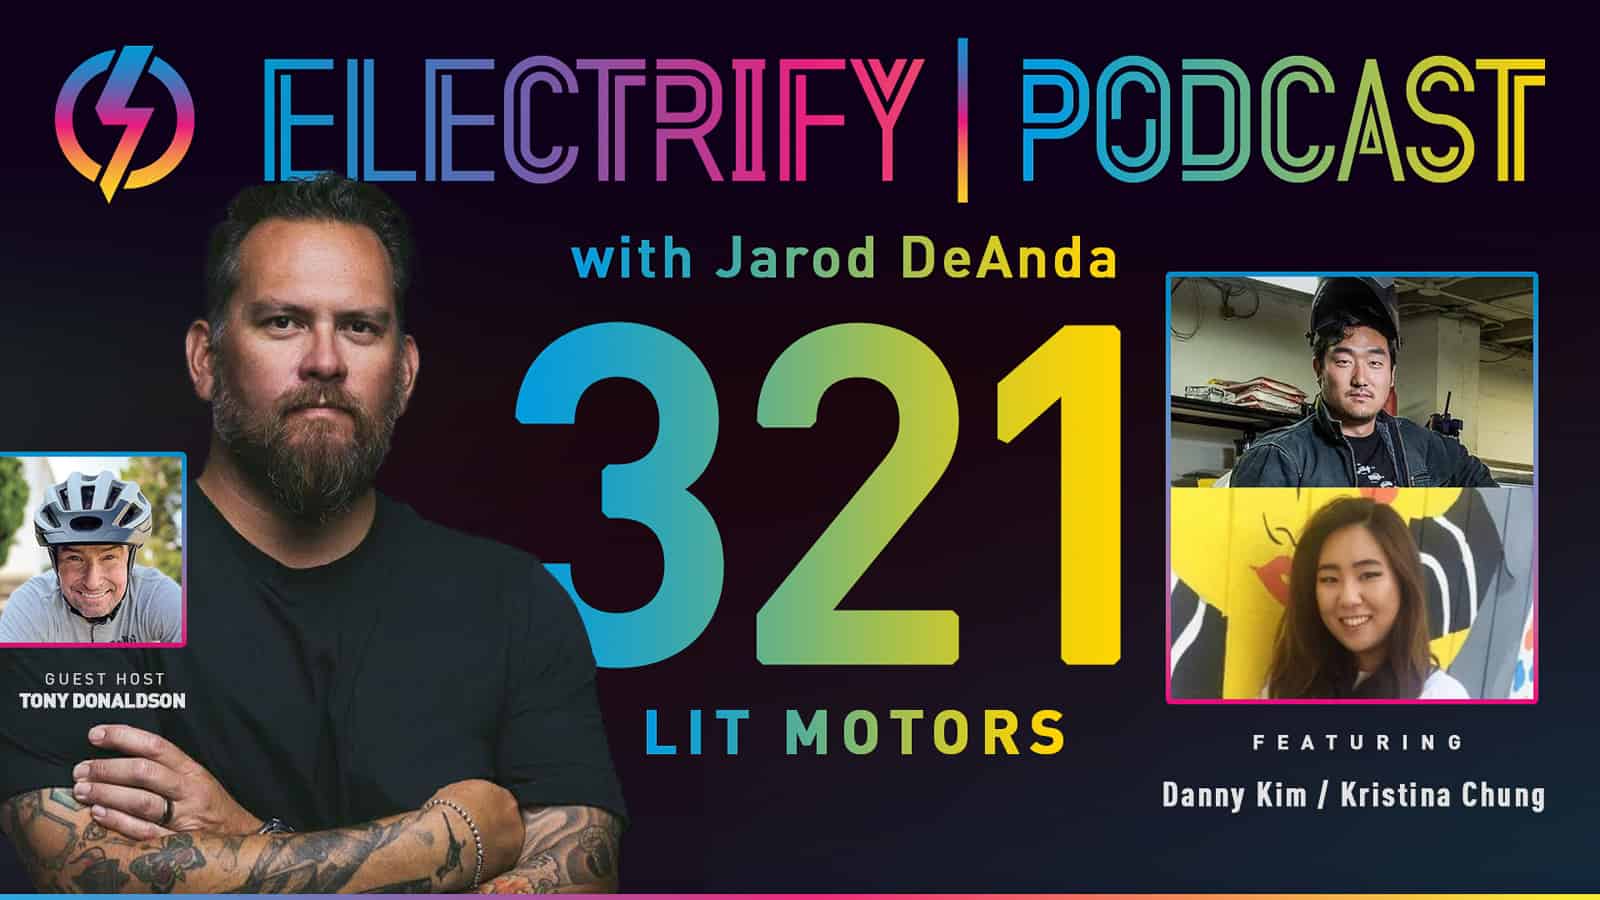 Promotional image of Electrify Podcast episode 321 with guests Danny Kim and Kristina Chung of Lit Motors